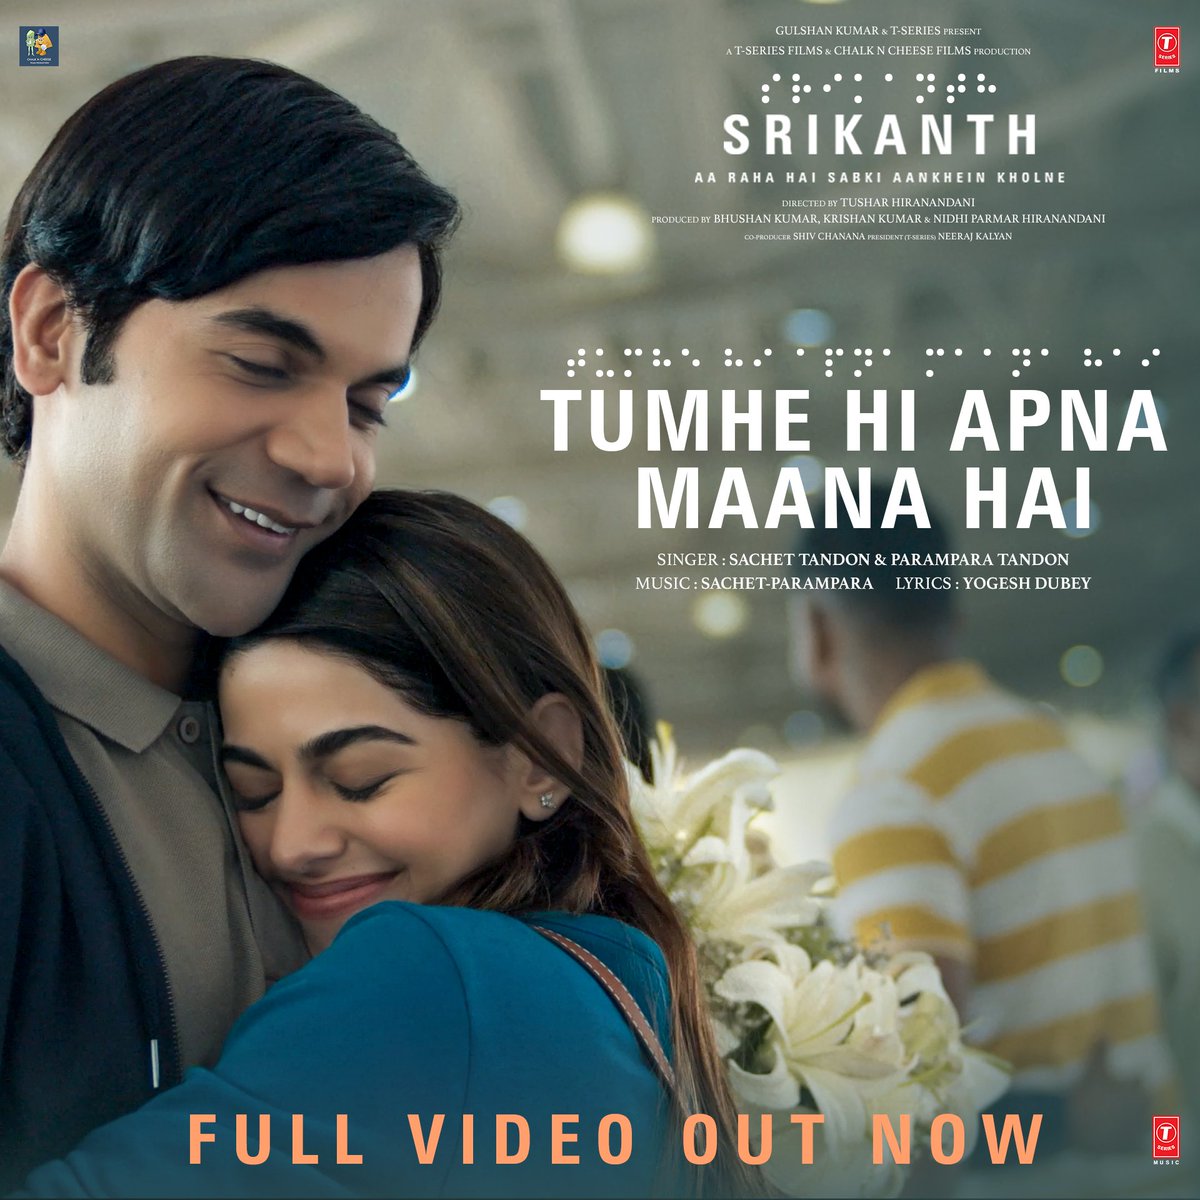 Your favourite song that touches your soul and embraces that beautiful feeling is fully out now! 🥰 #TumheHiApnaMaanaHai Full Video Out, tune in now! 🔗 - bit.ly/TumheHiApnaMaa… #Srikanth in cinemas near you. #SrikanthBolla @RajkummarRao #Jyothika @AlayaF___ @SharadK7